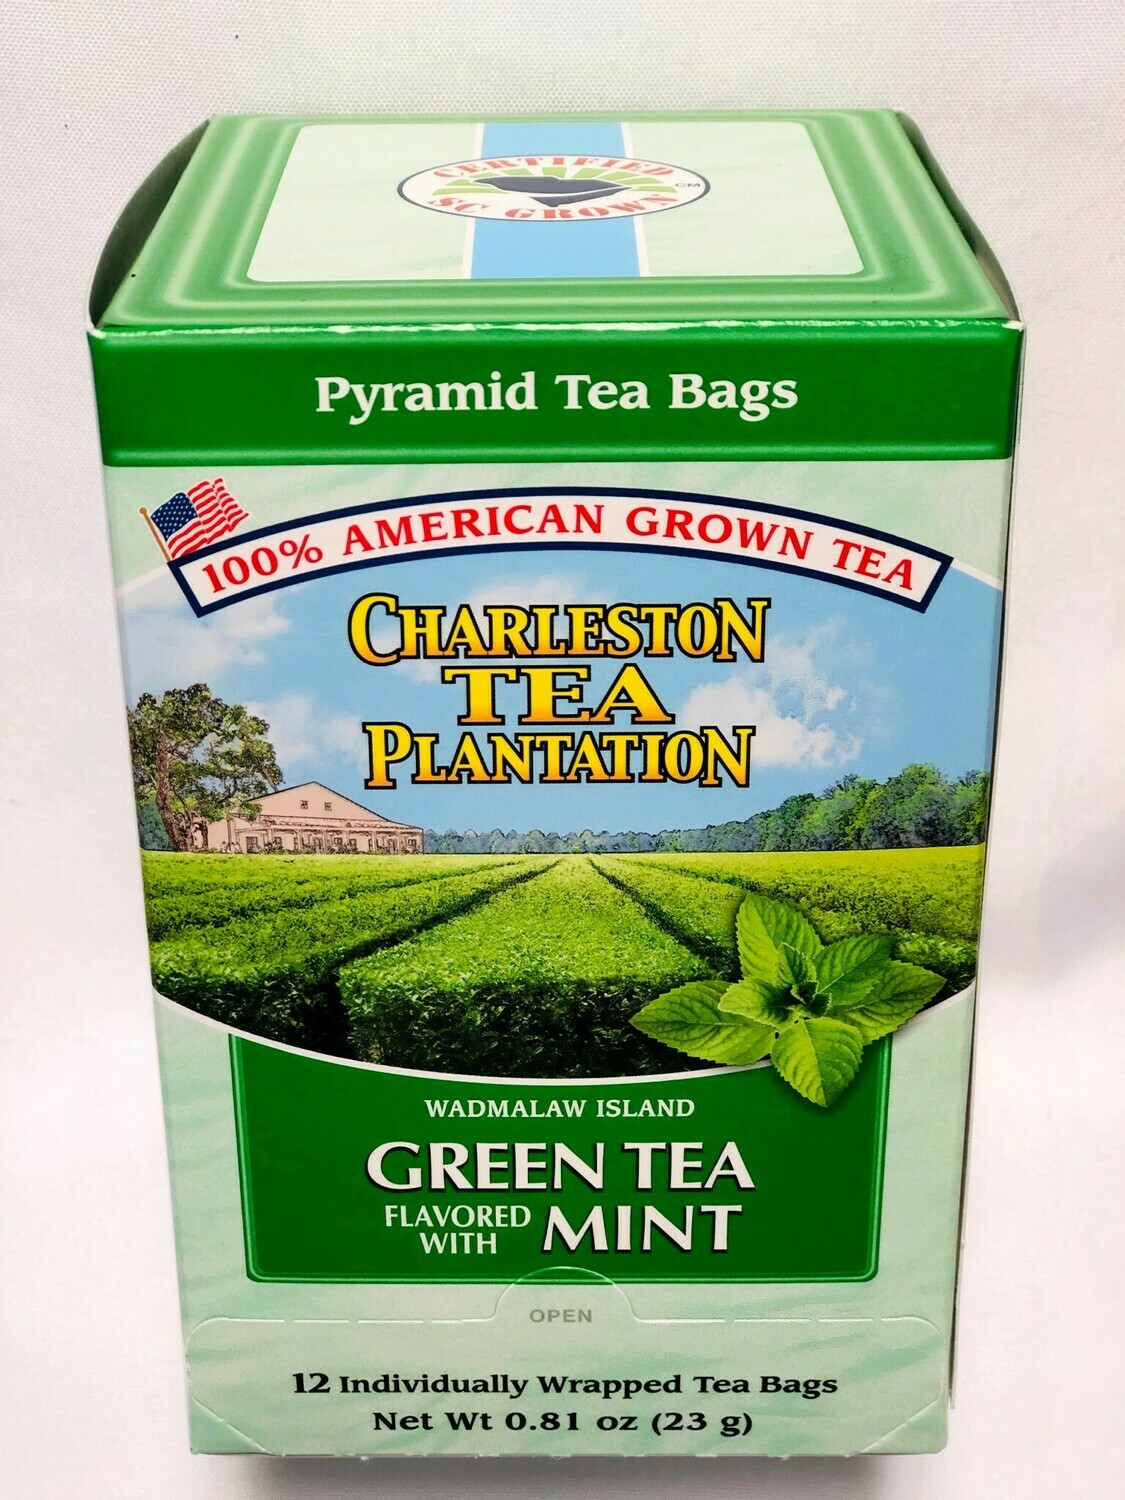 Green Tea flavored with Mint